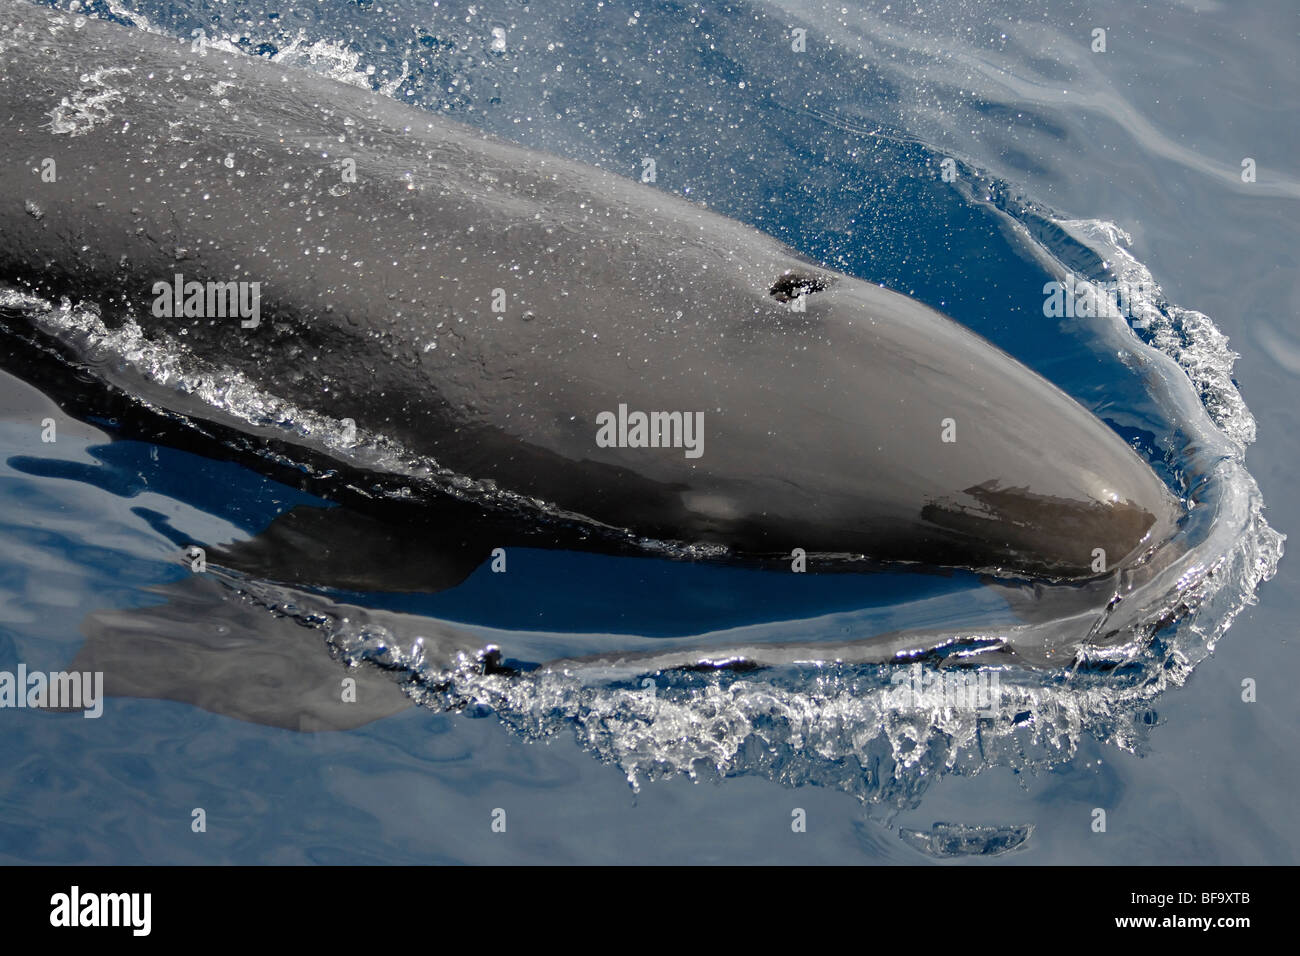 False Killer Whale, Pseudorca crassidens, surfaces right next to whale watch boat, Maldives, Indian Ocean. Stock Photo